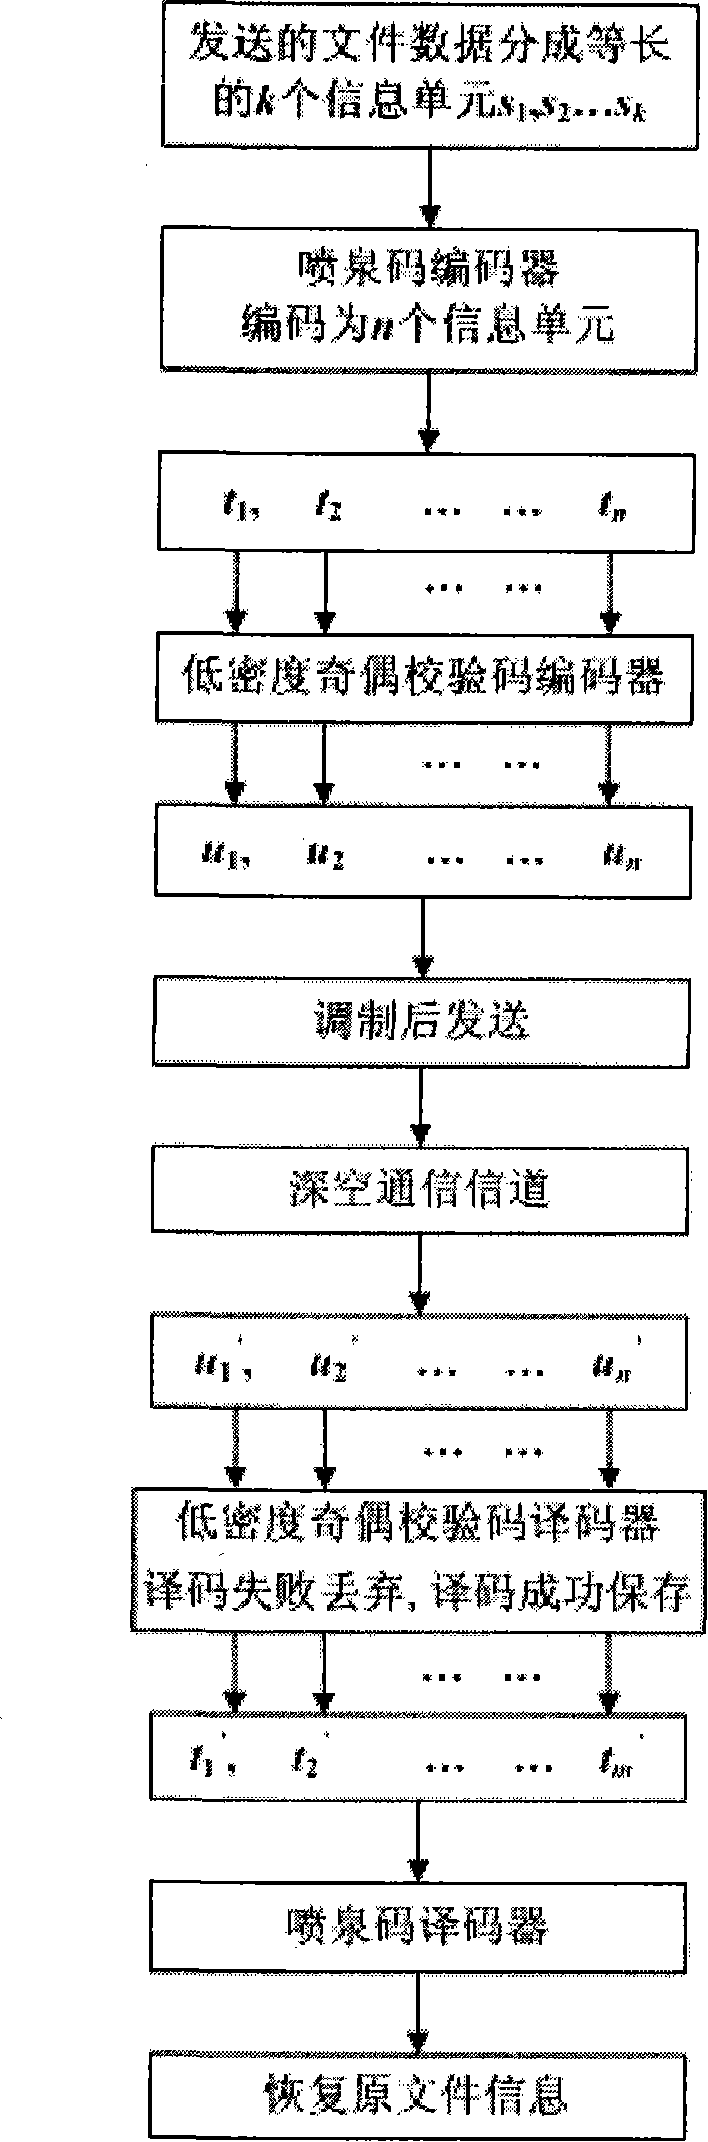 Method for translating and editing fountain code based on low density parity check code in deep space communication